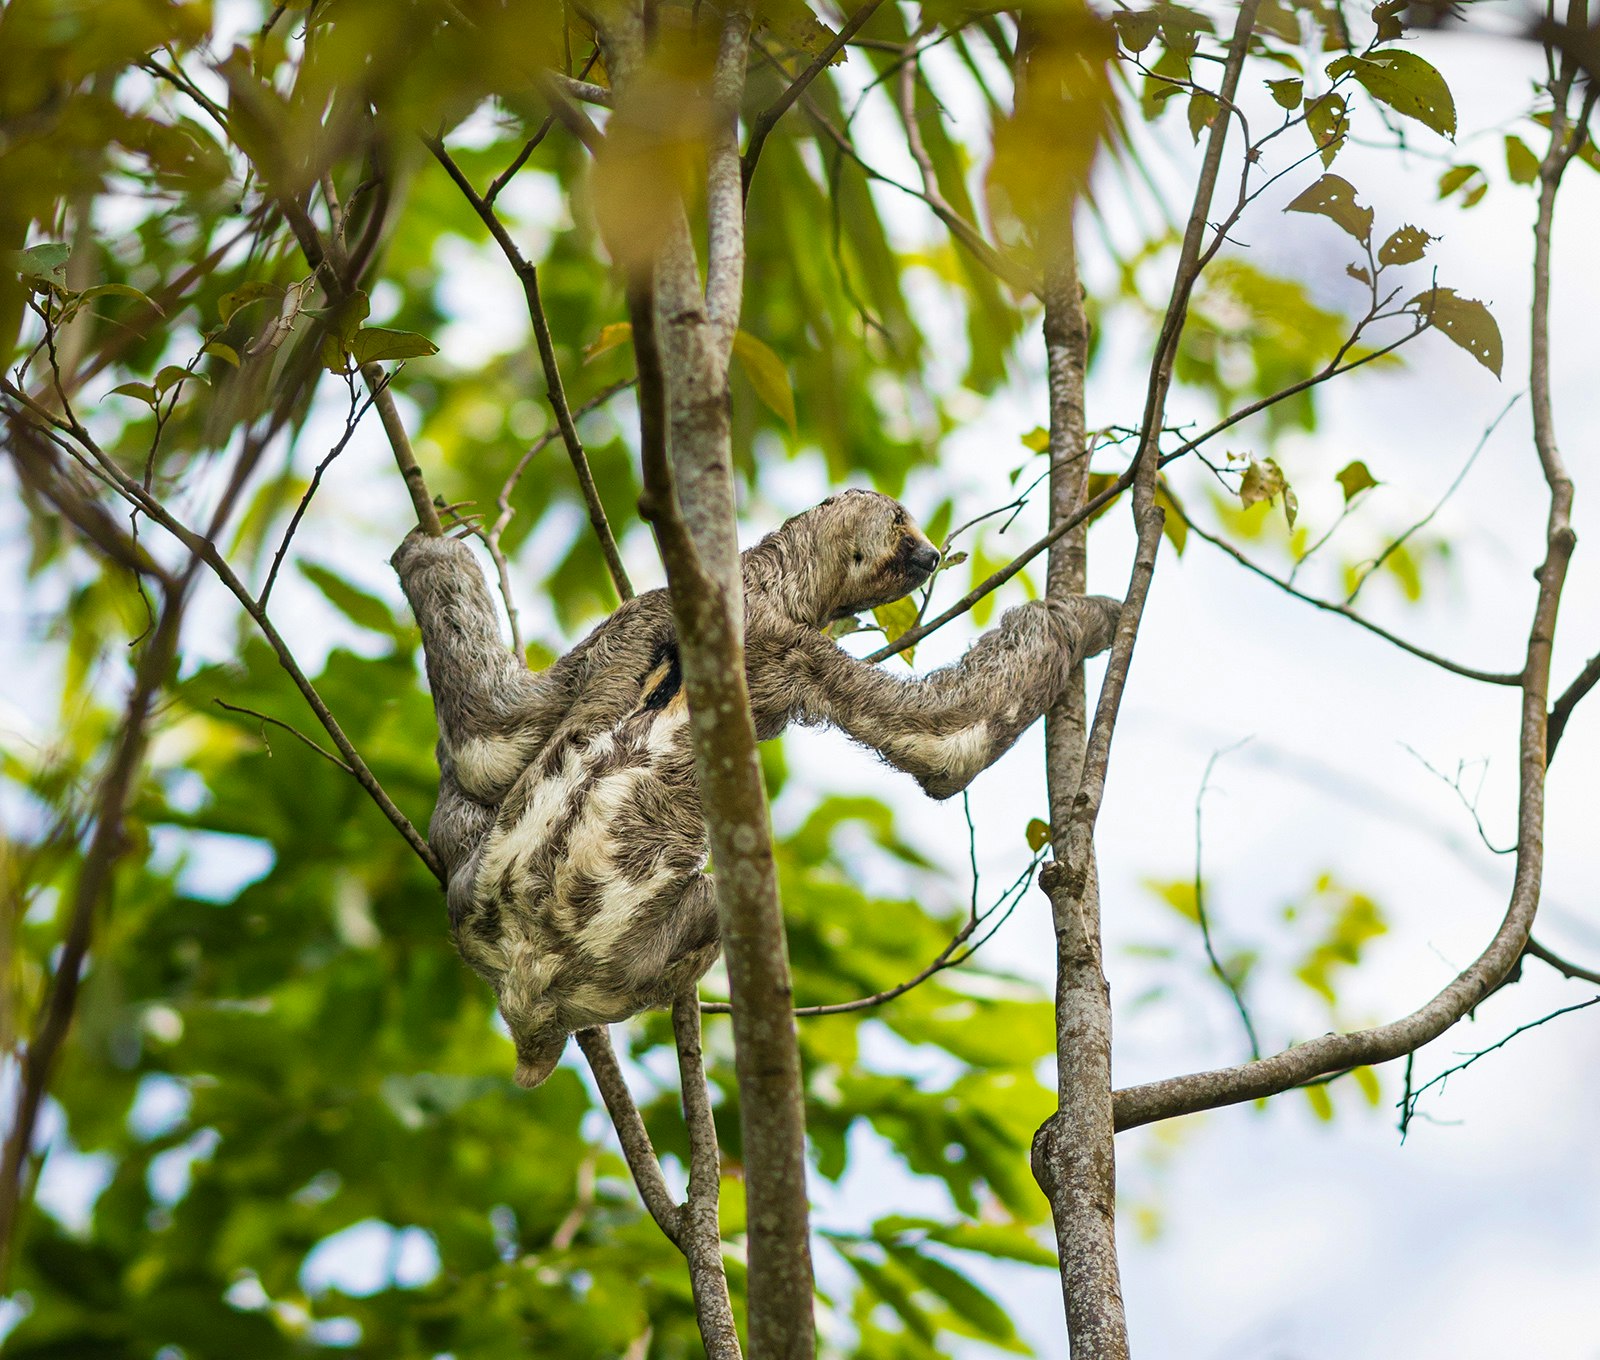 A sloth reaches across to a branch in a tree.